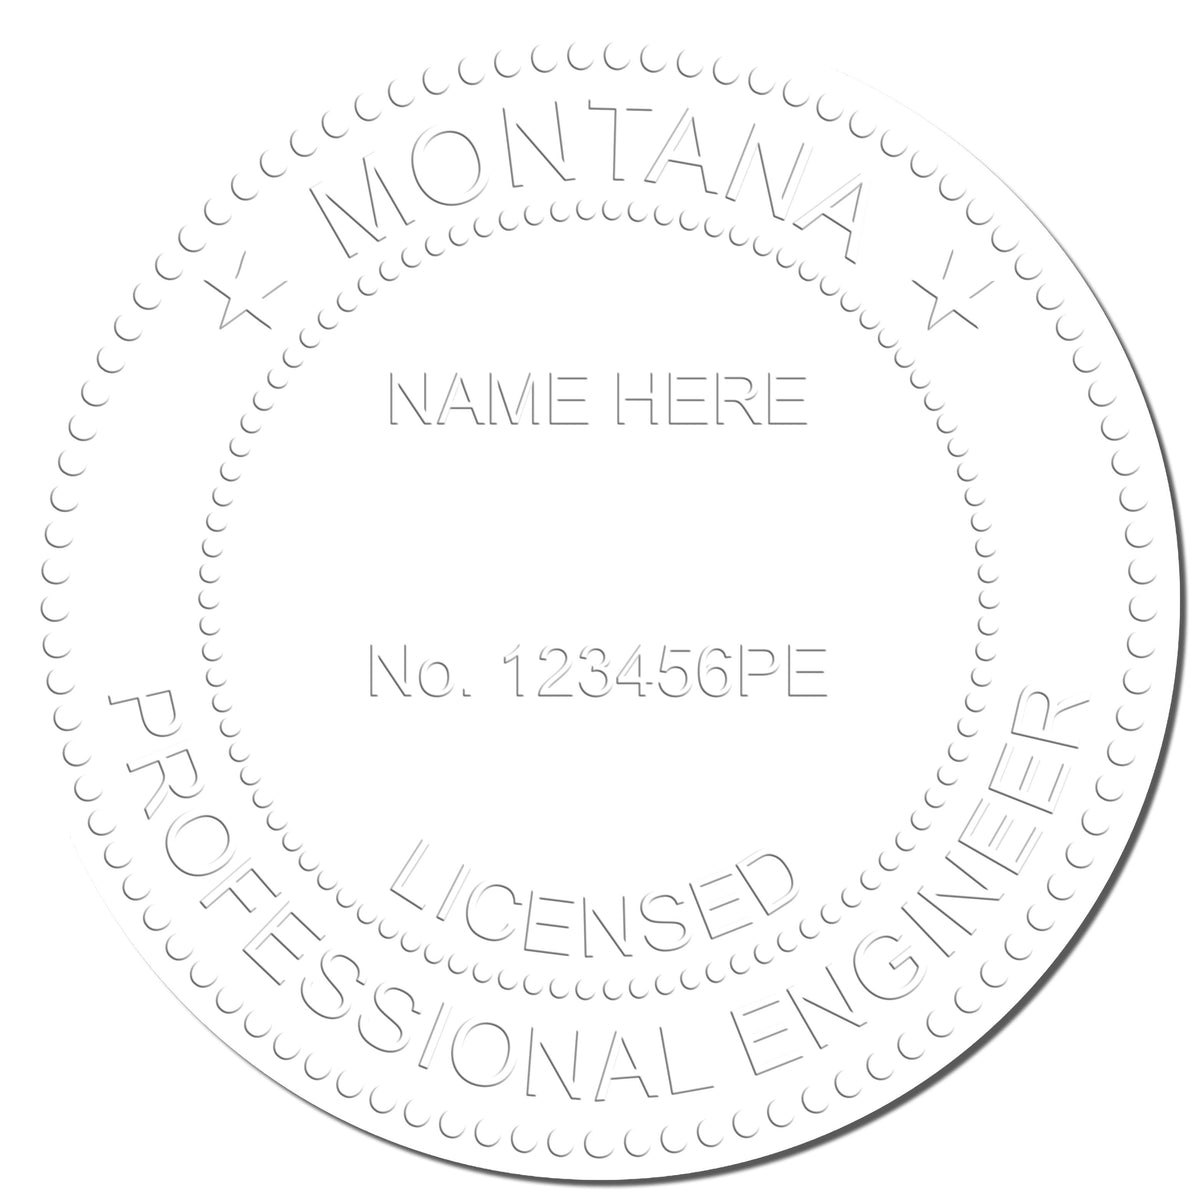 This paper is stamped with a sample imprint of the Hybrid Montana Engineer Seal, signifying its quality and reliability.